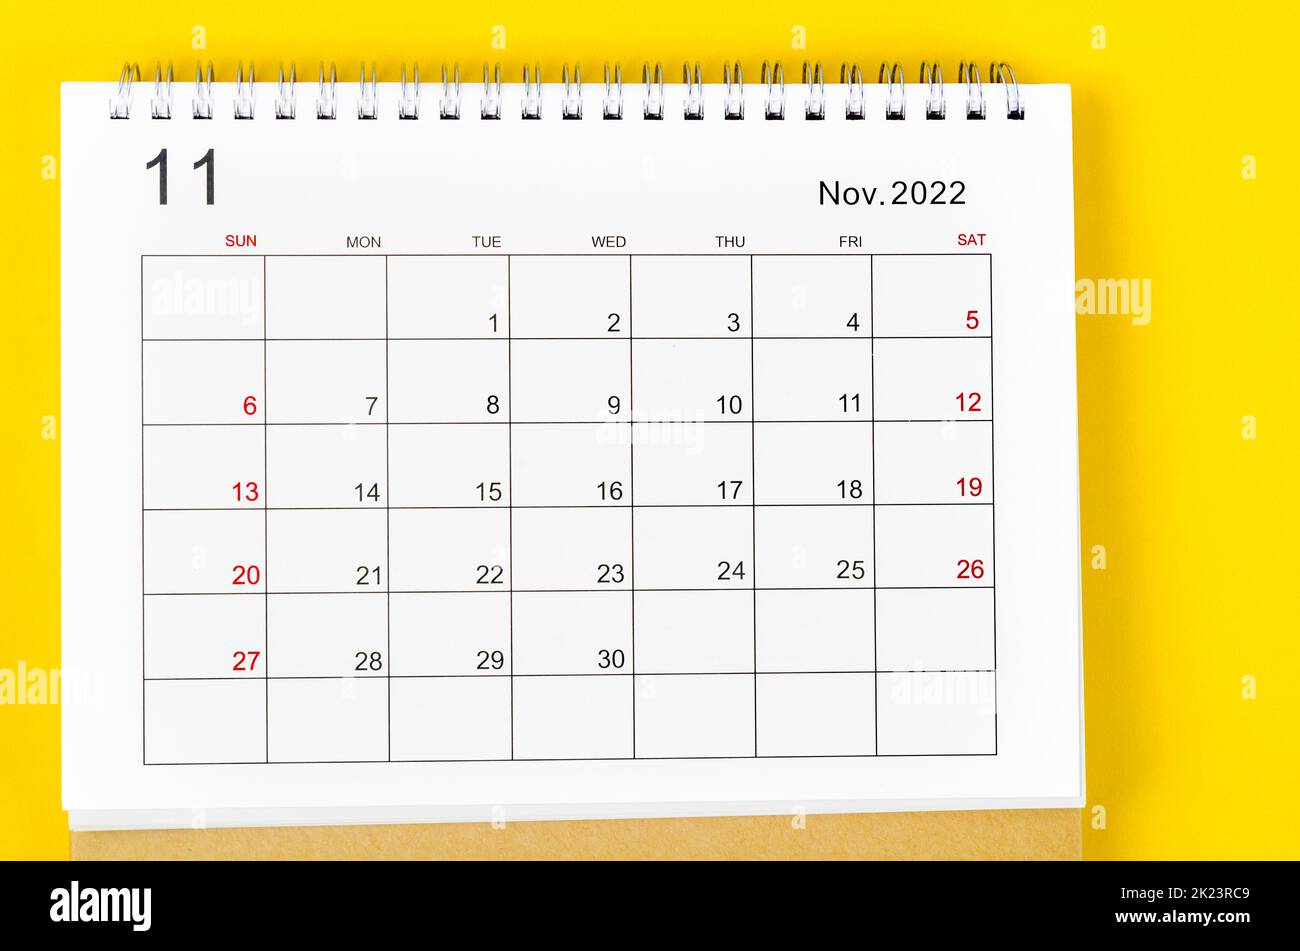 November 2022 Monthly desk calendar for 2022 year on yellow background. Stock Photo